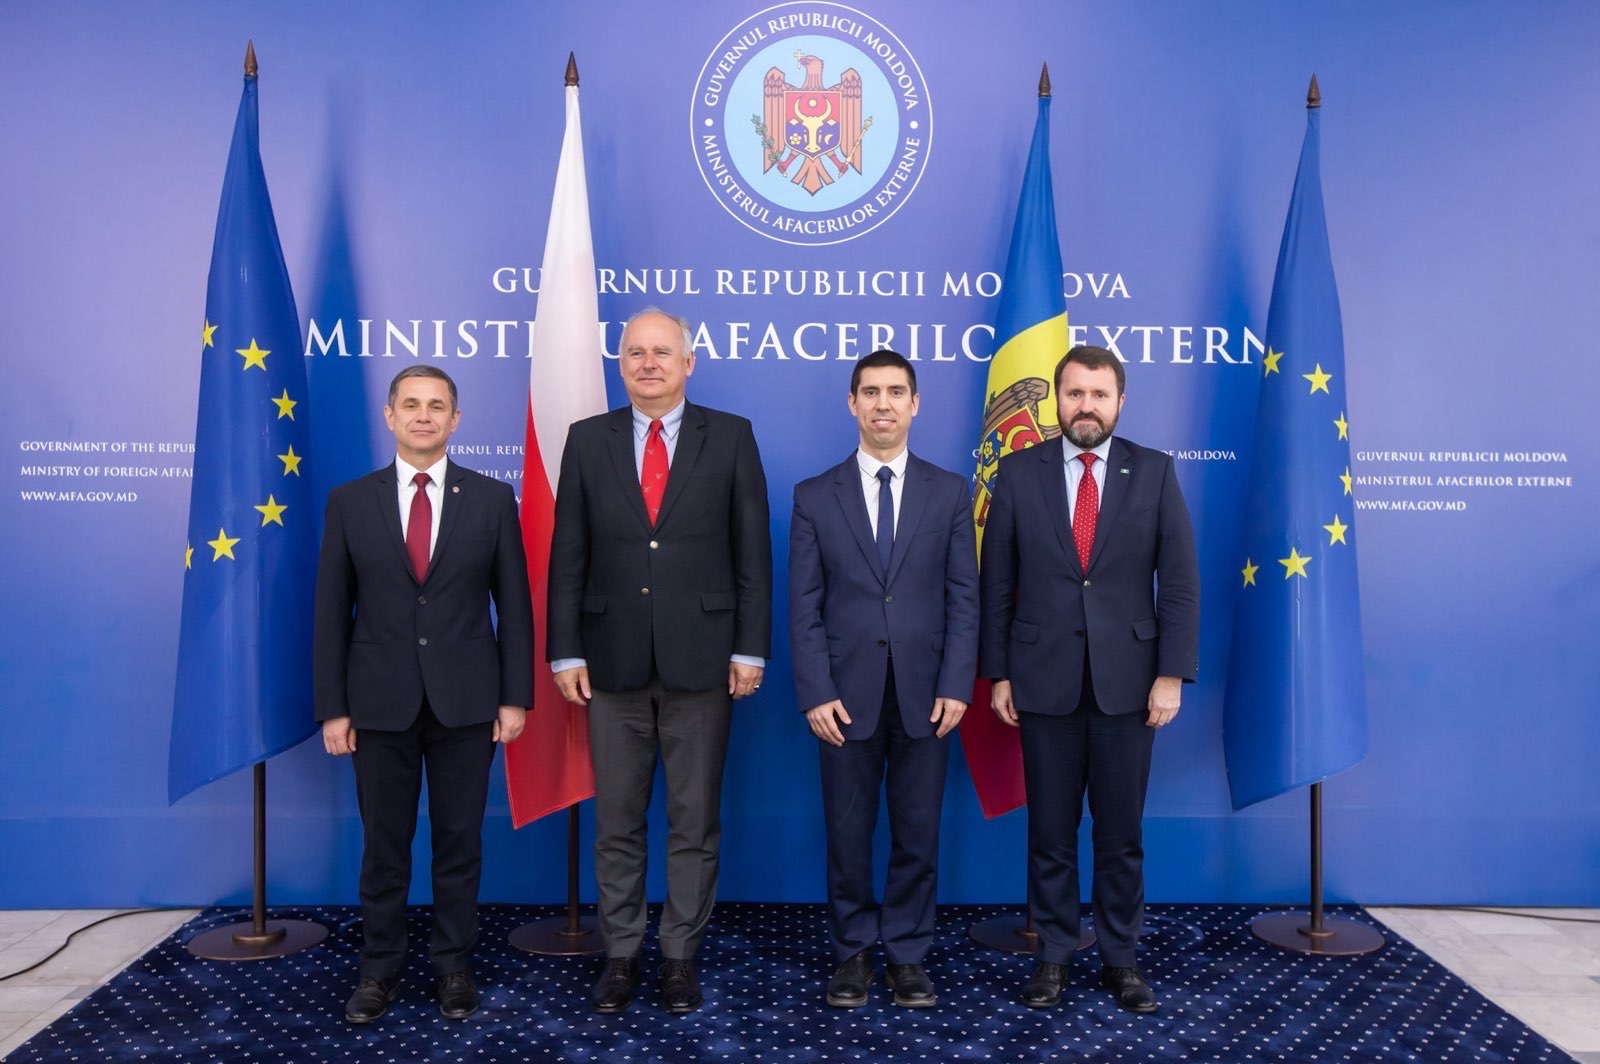 Political-military consultations between the Republic of Moldova and the Republic of Poland took place in Chisinau